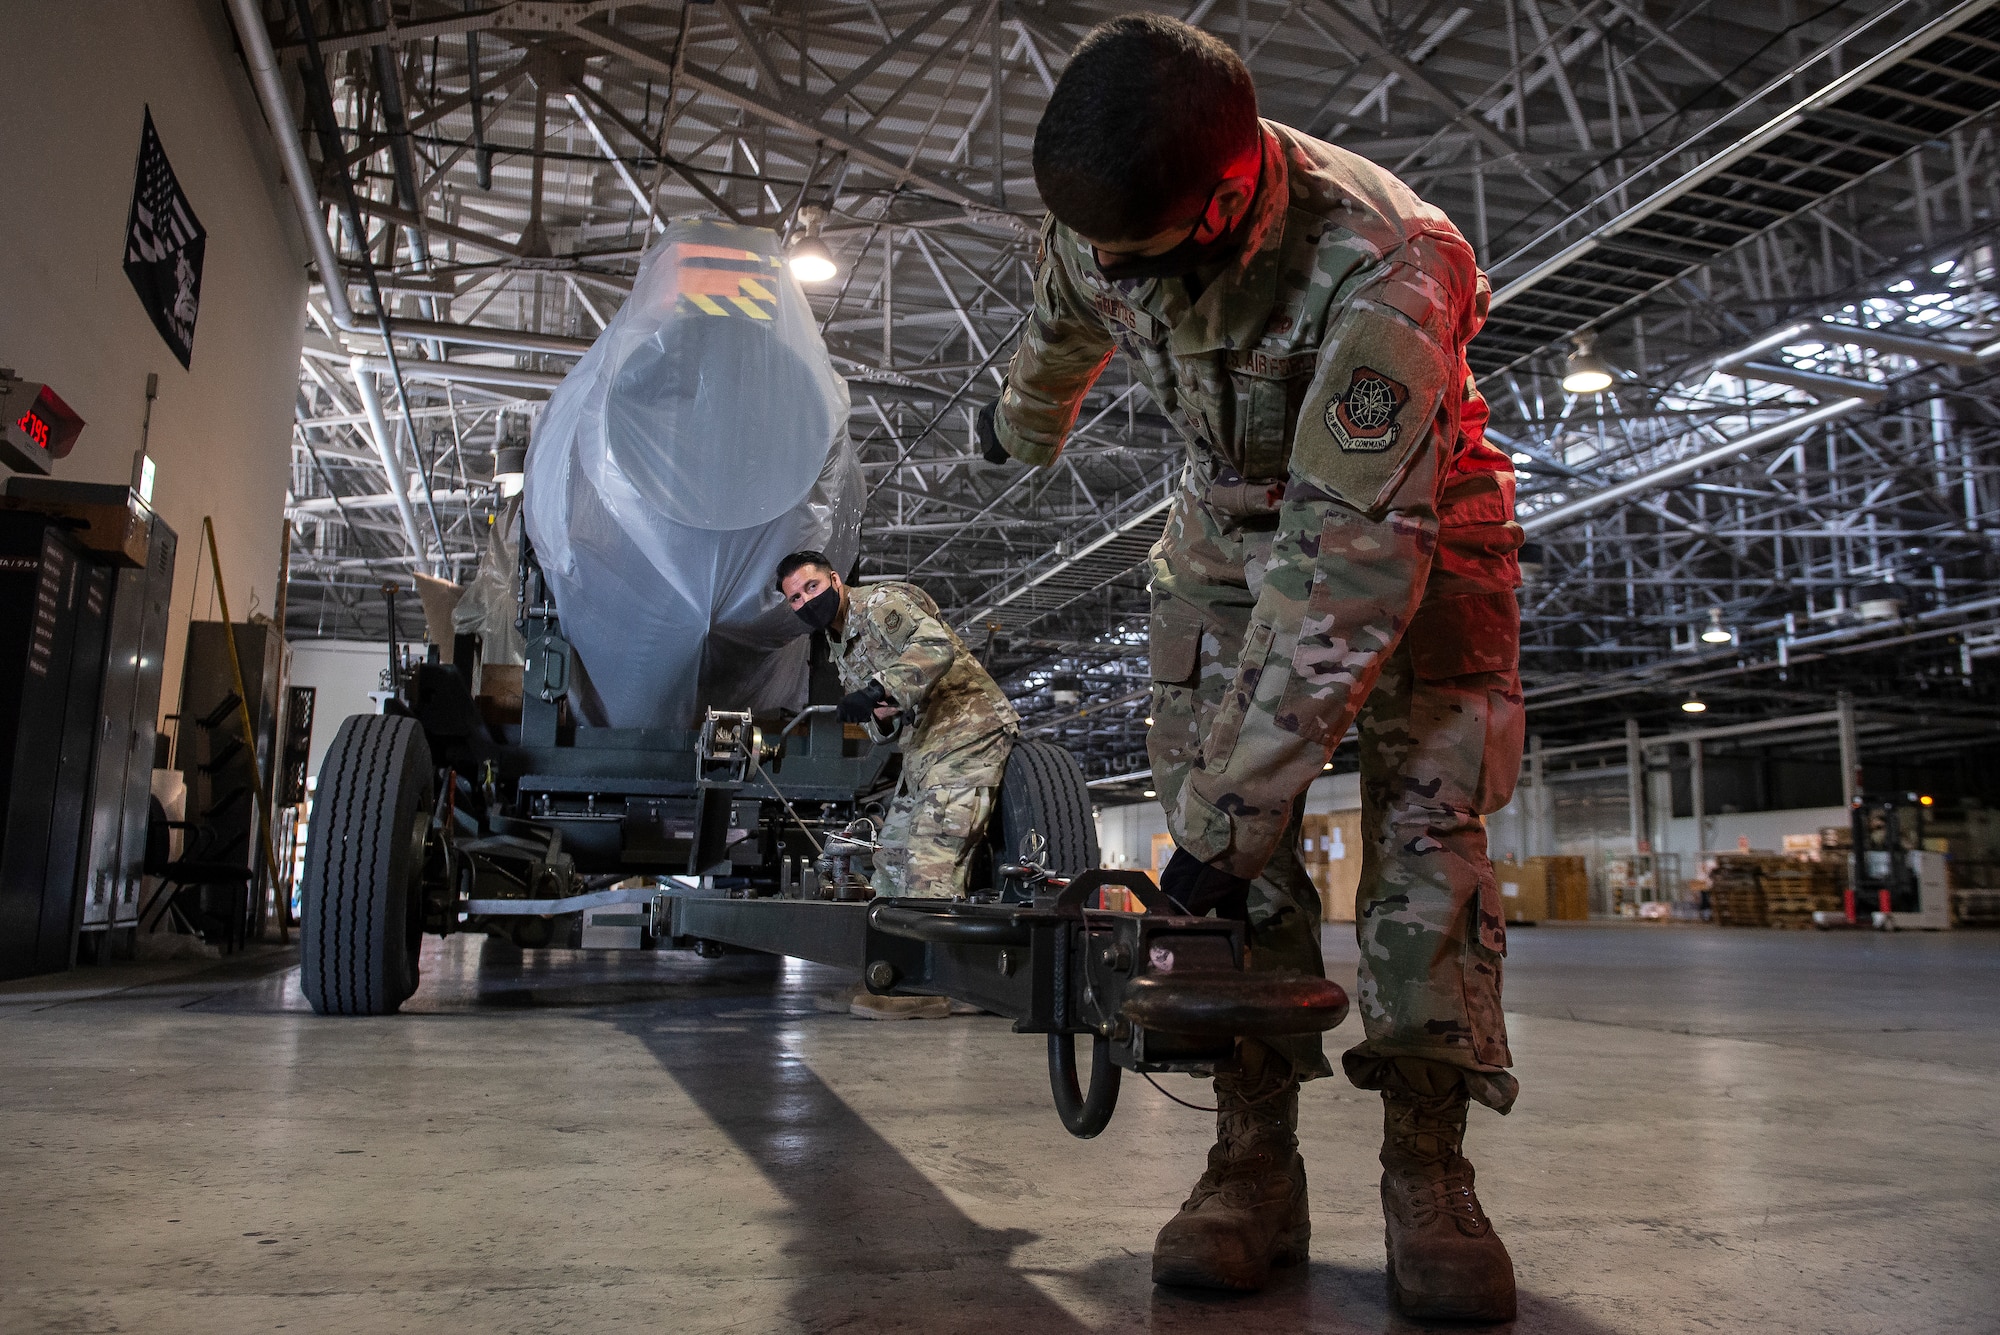 Staff Sgt. Michael Freitas, right, 730th Air Mobility Squadron air freight shift supervisor, and Staff Sgt. Adrian Diaz, left, 730th AMS aerospace propulsion craftsman, weigh a C-17 engine prior to loading it onto a C-17 Globemaster III, May 4, 2021, at Yokota Air Base, Japan. The 730th AMS gave the engine to Kadena Air Base airmen assigned to the 733rd AMS to enhance their training program, allowing maintainers to navigate nomenclature and troubleshoot engine issues on a real aircraft asset. Finding ways to improve training helps increase the readiness and resilience of our force and ensures Pacific Air Forces’ ability to fight and win if needed.